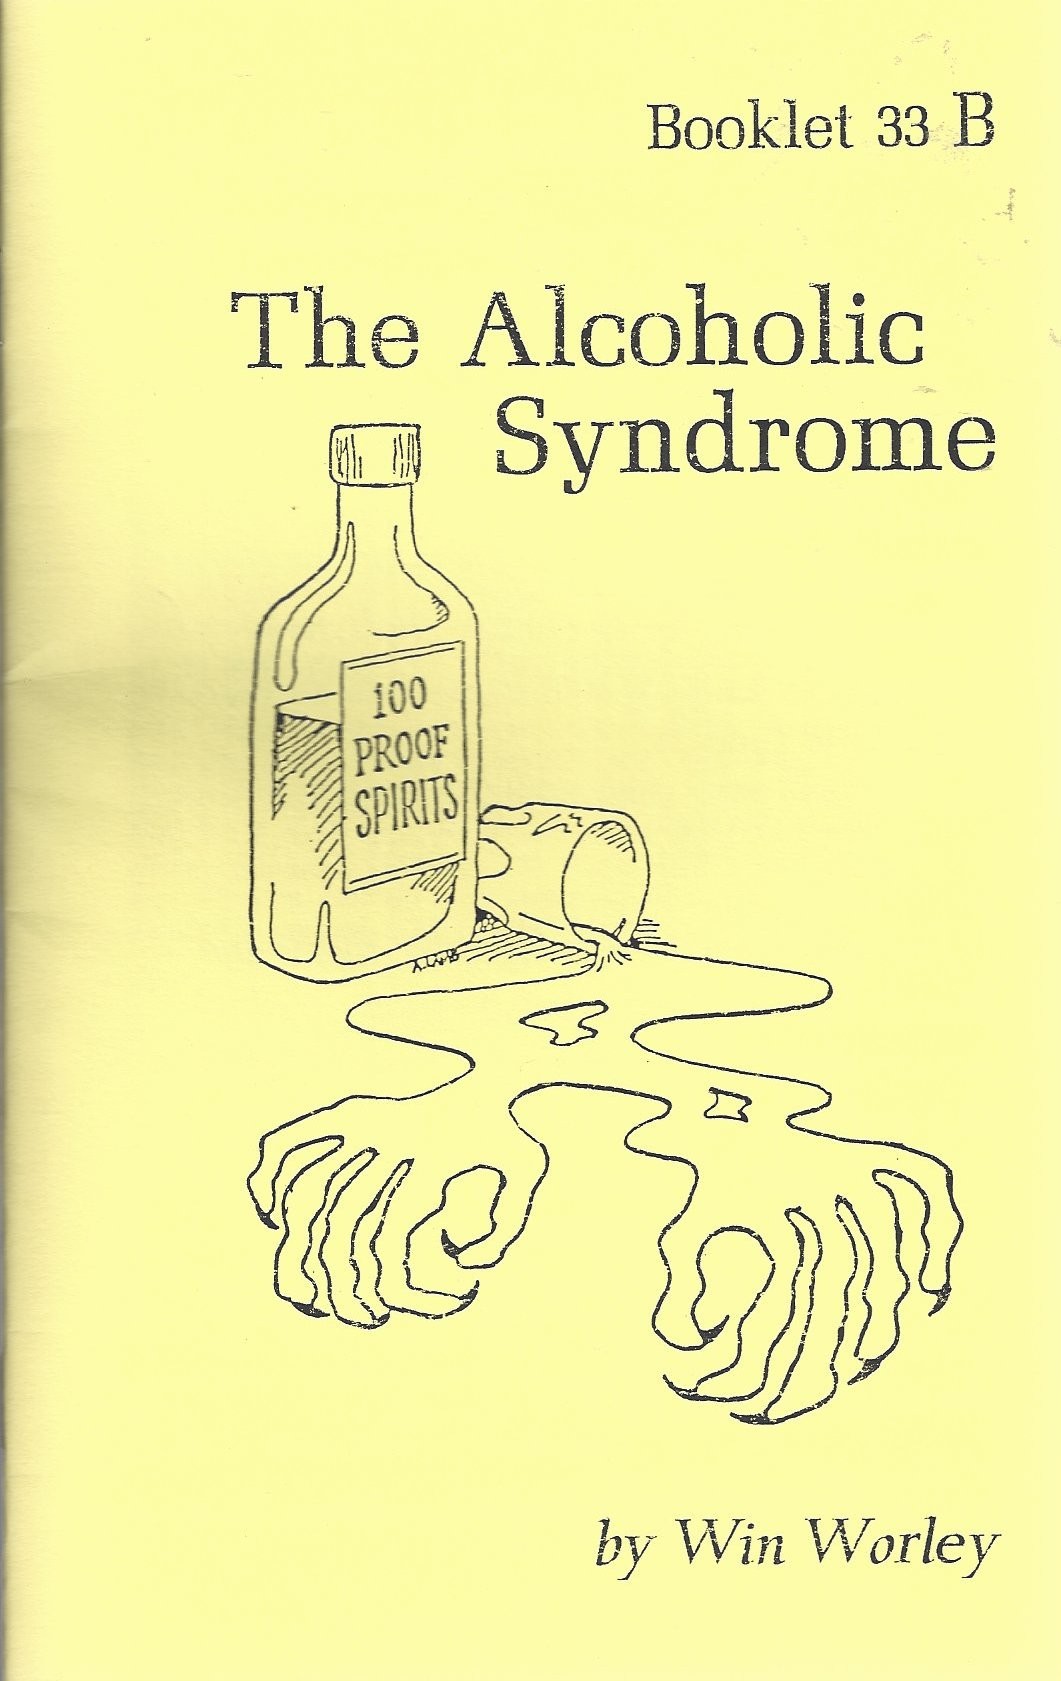 Alcoholic Syndrome 33b front